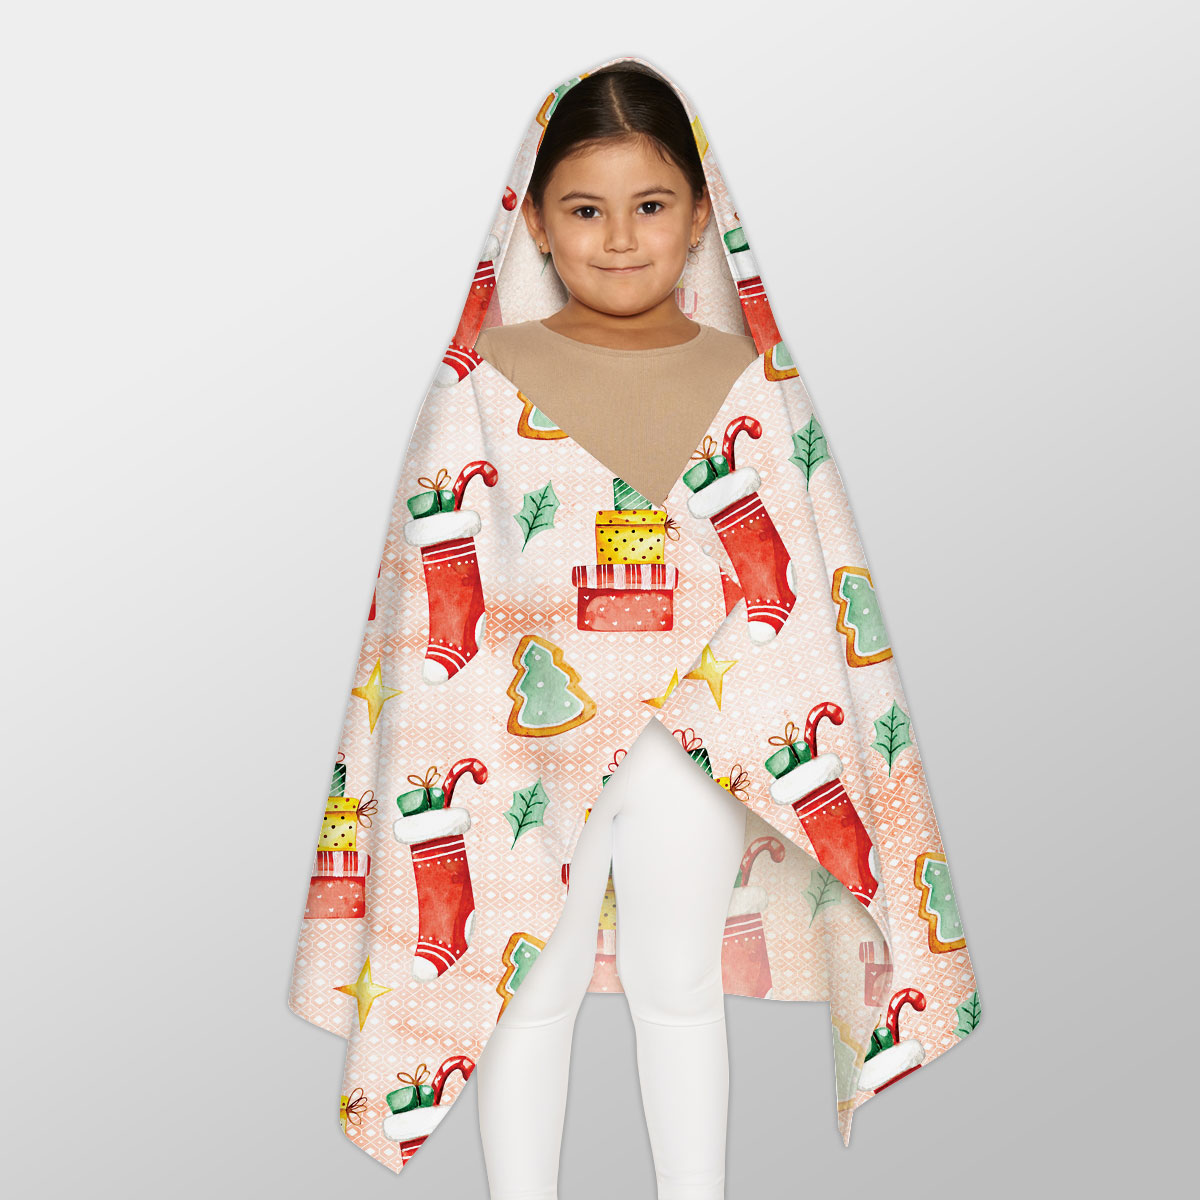 Gingerbread, Christmas Tree, Red Socks With Candy Canes Youth Hooded Towel